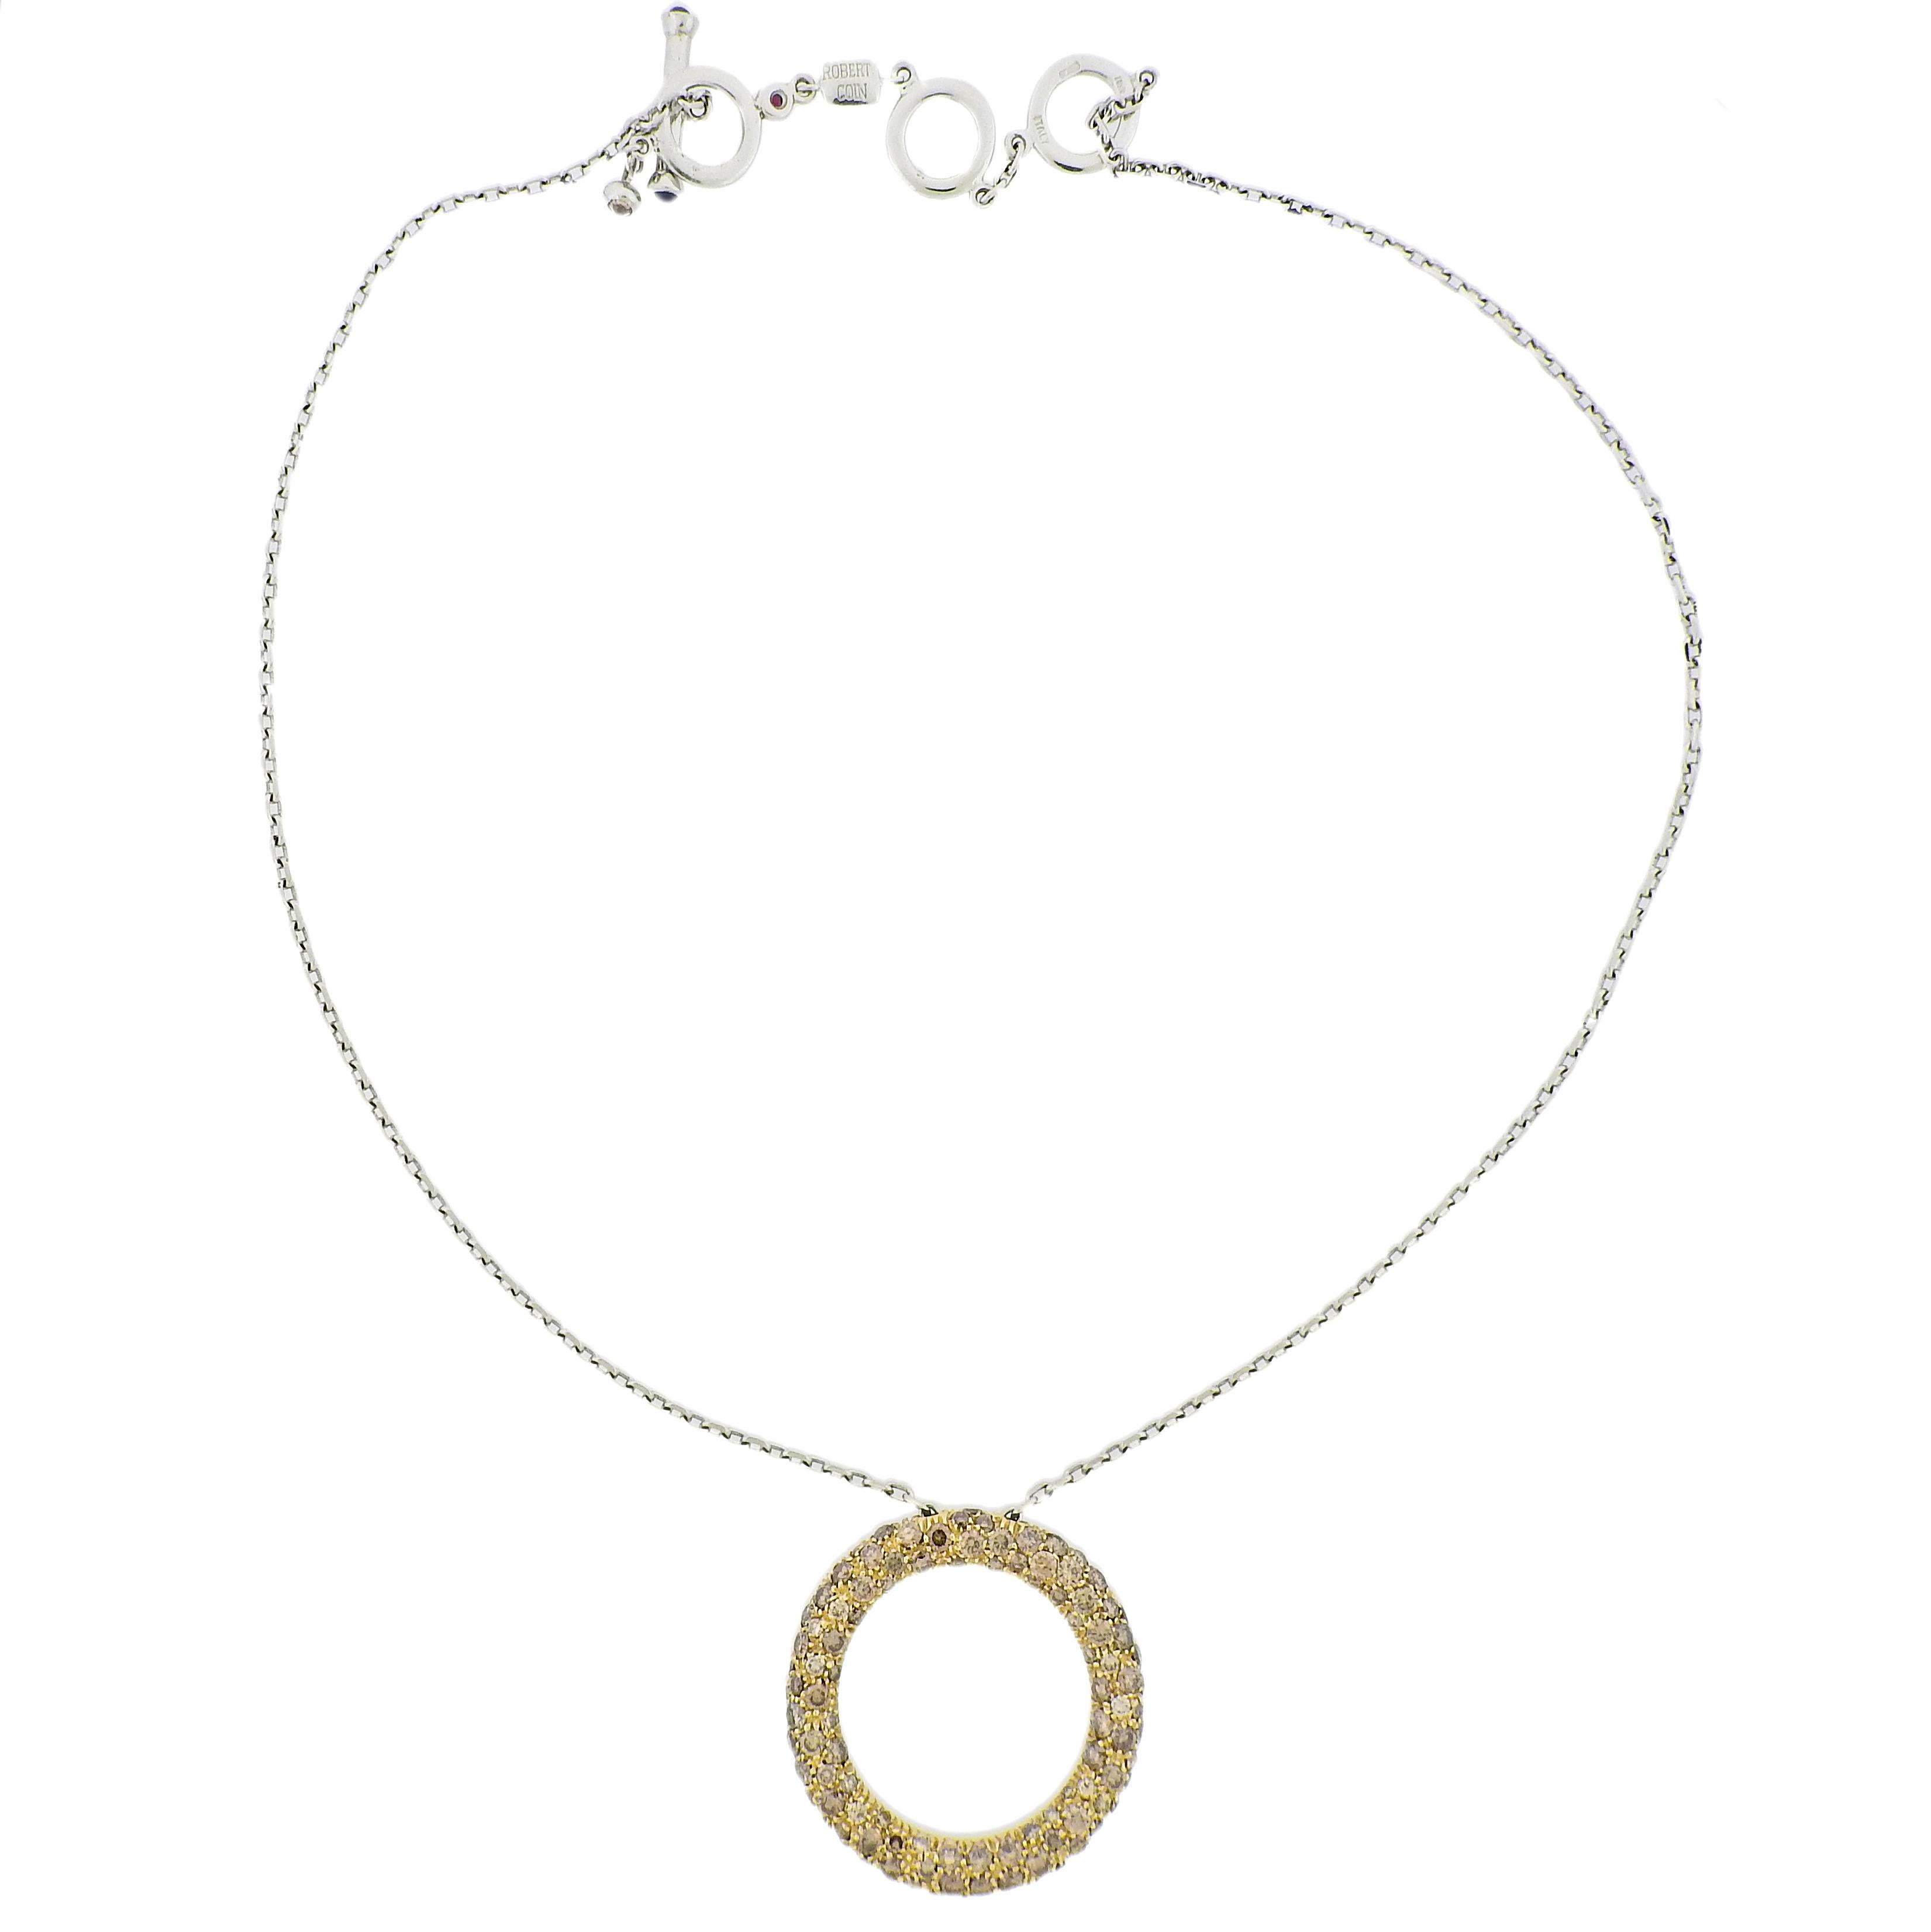 Roberto Coin Fancy Diamond Gold Circle Pendant Necklace. Necklace is set with approx 4.00ctw of VS fancy diamonds. Pendant measures 32mm in diameter, necklace is 17